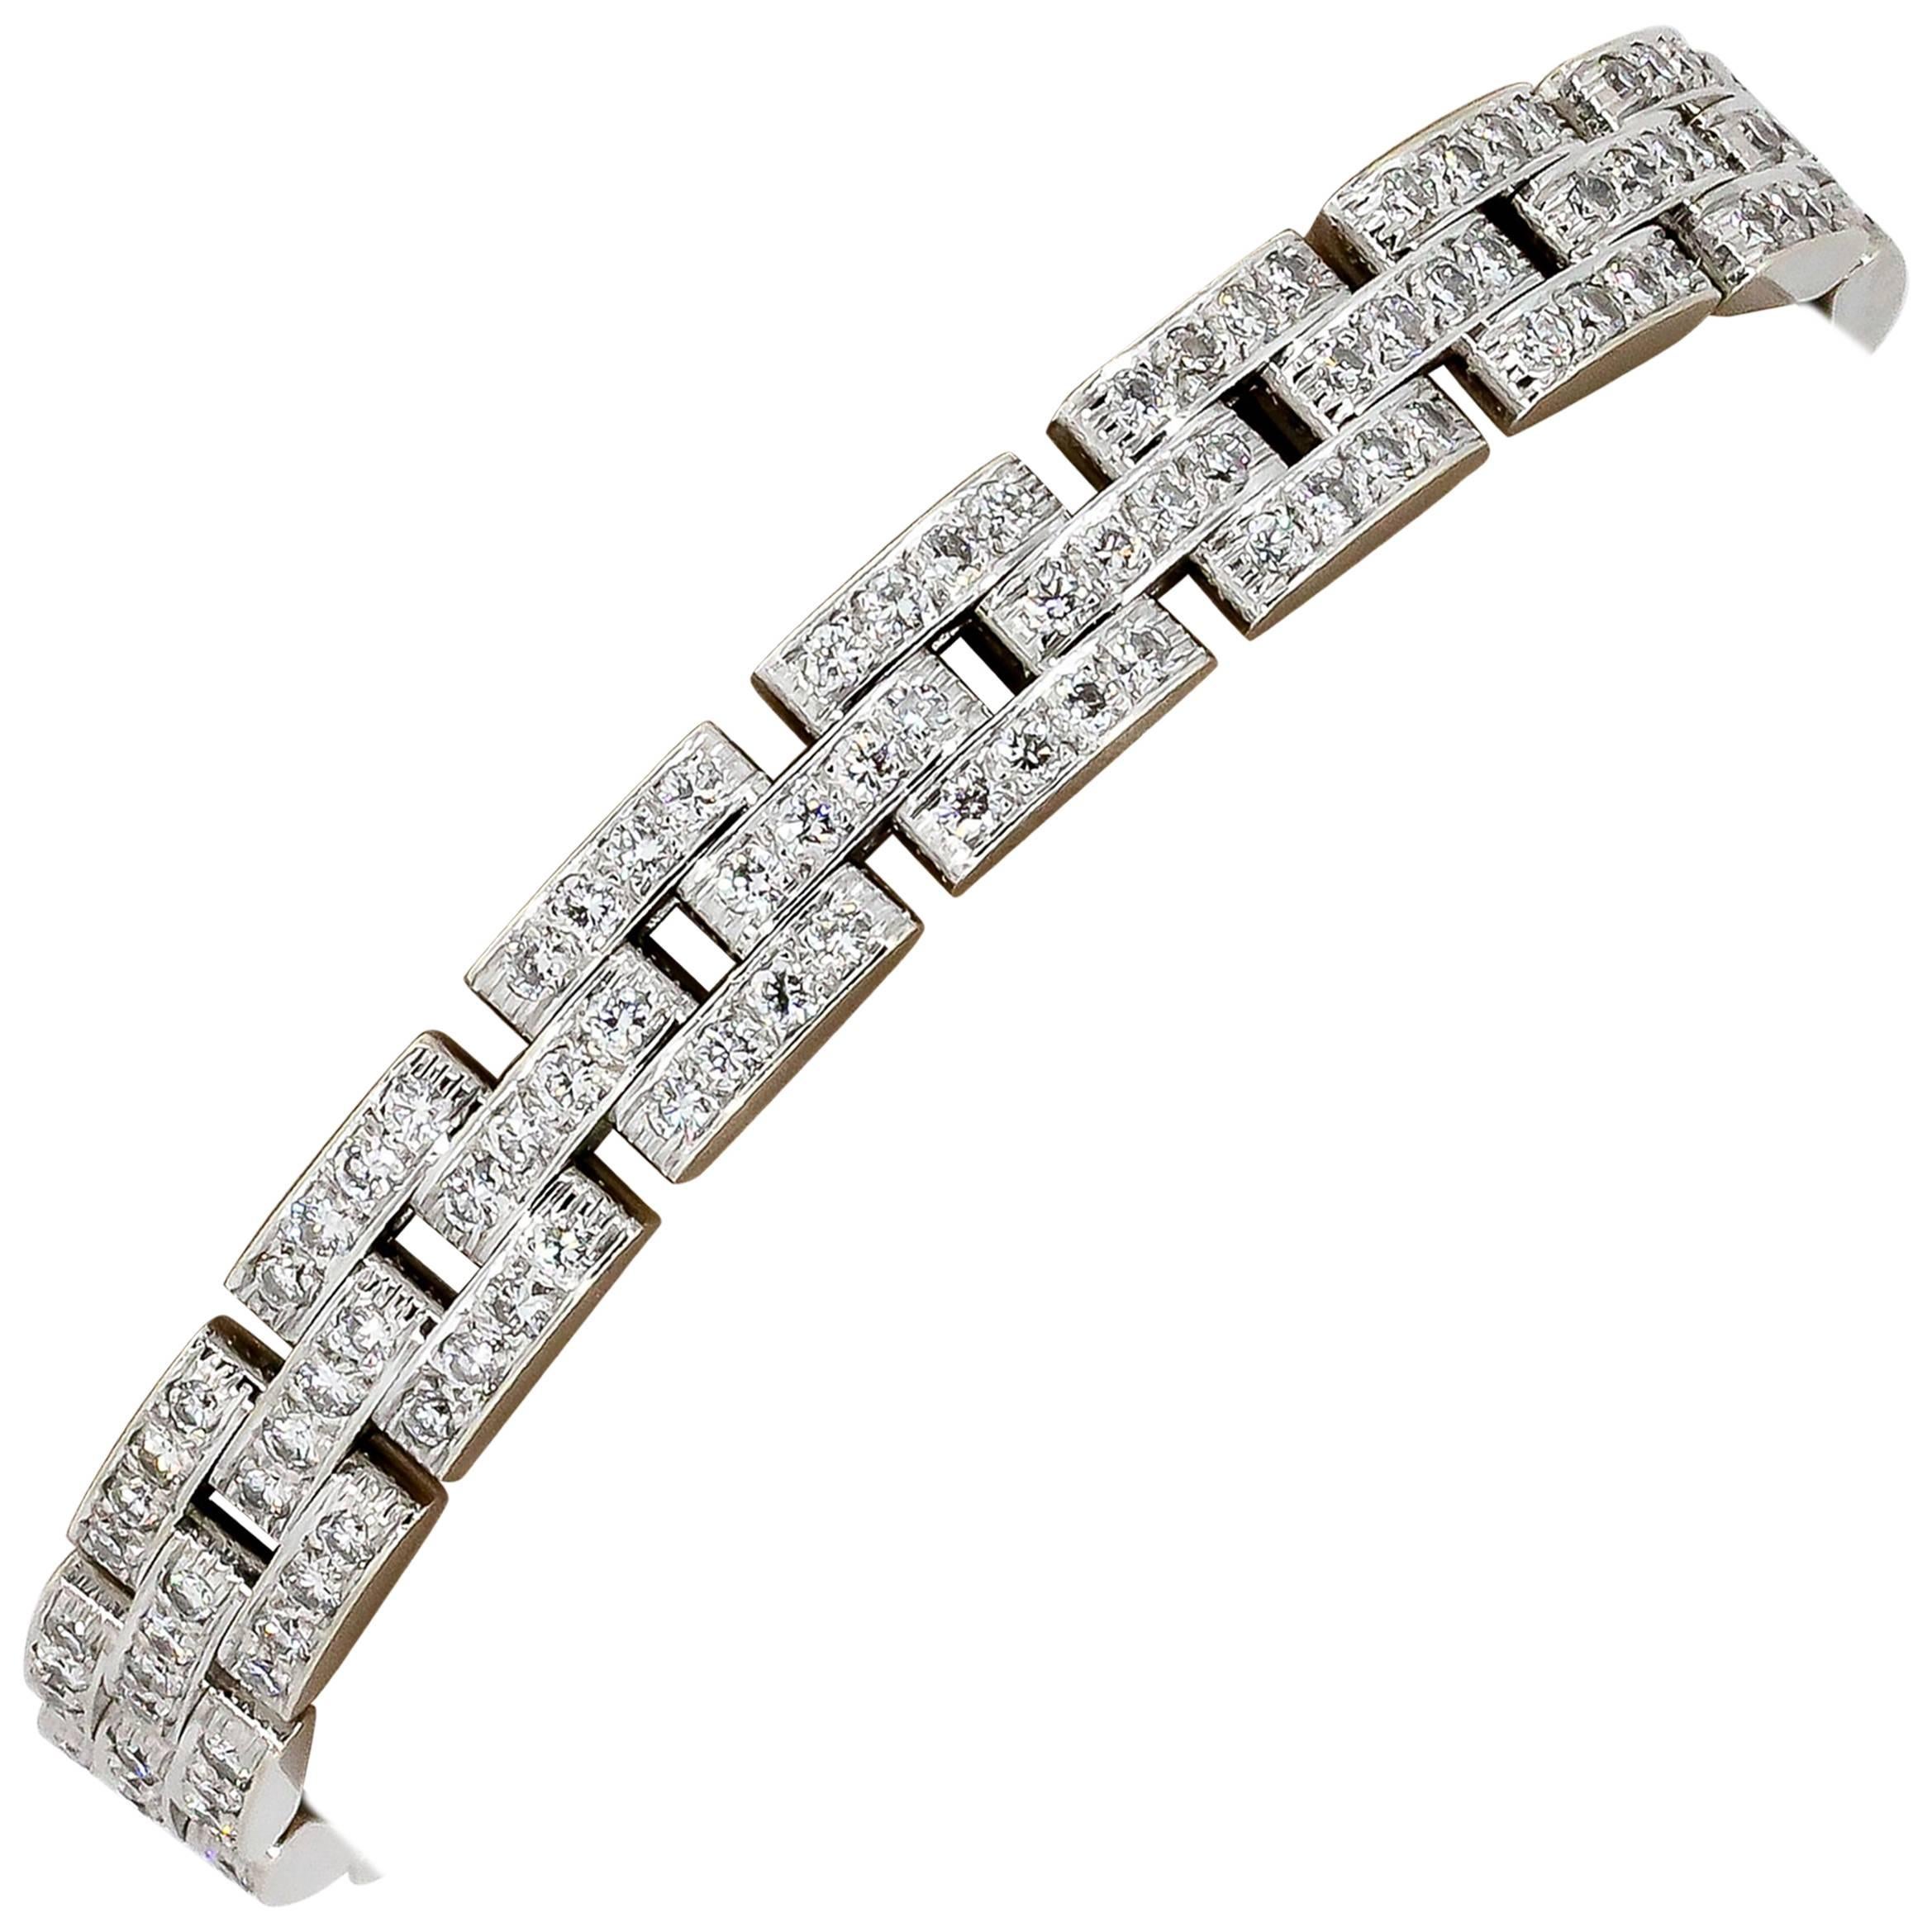 Cartier Maillon Panthere Diamond and White Gold Three-Row Link Bracelet